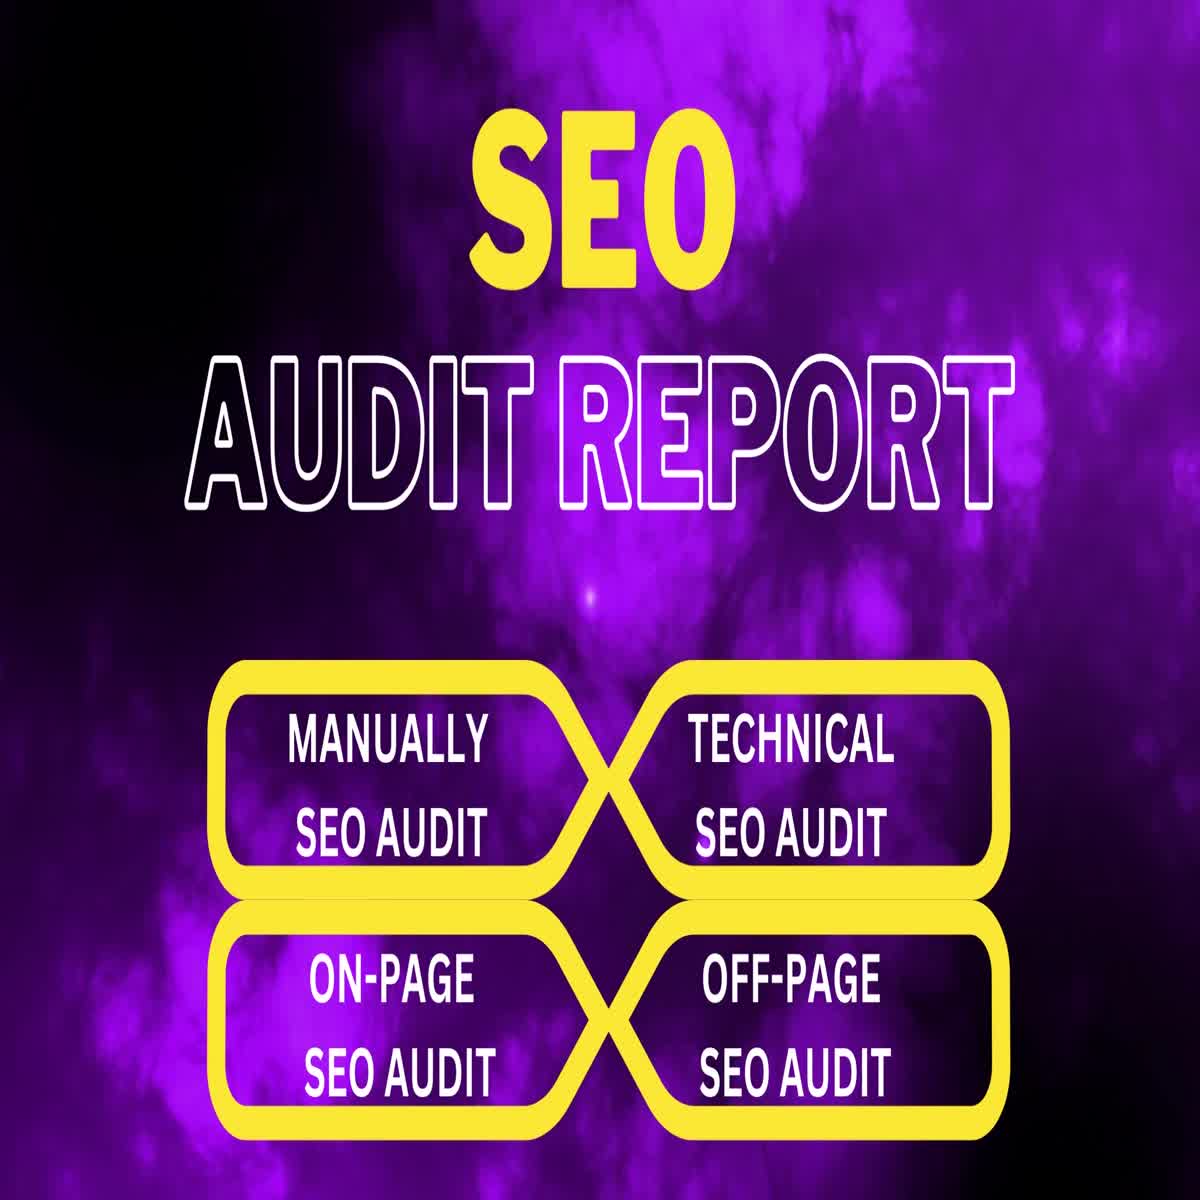 I will provide a detailed website SEO audit report